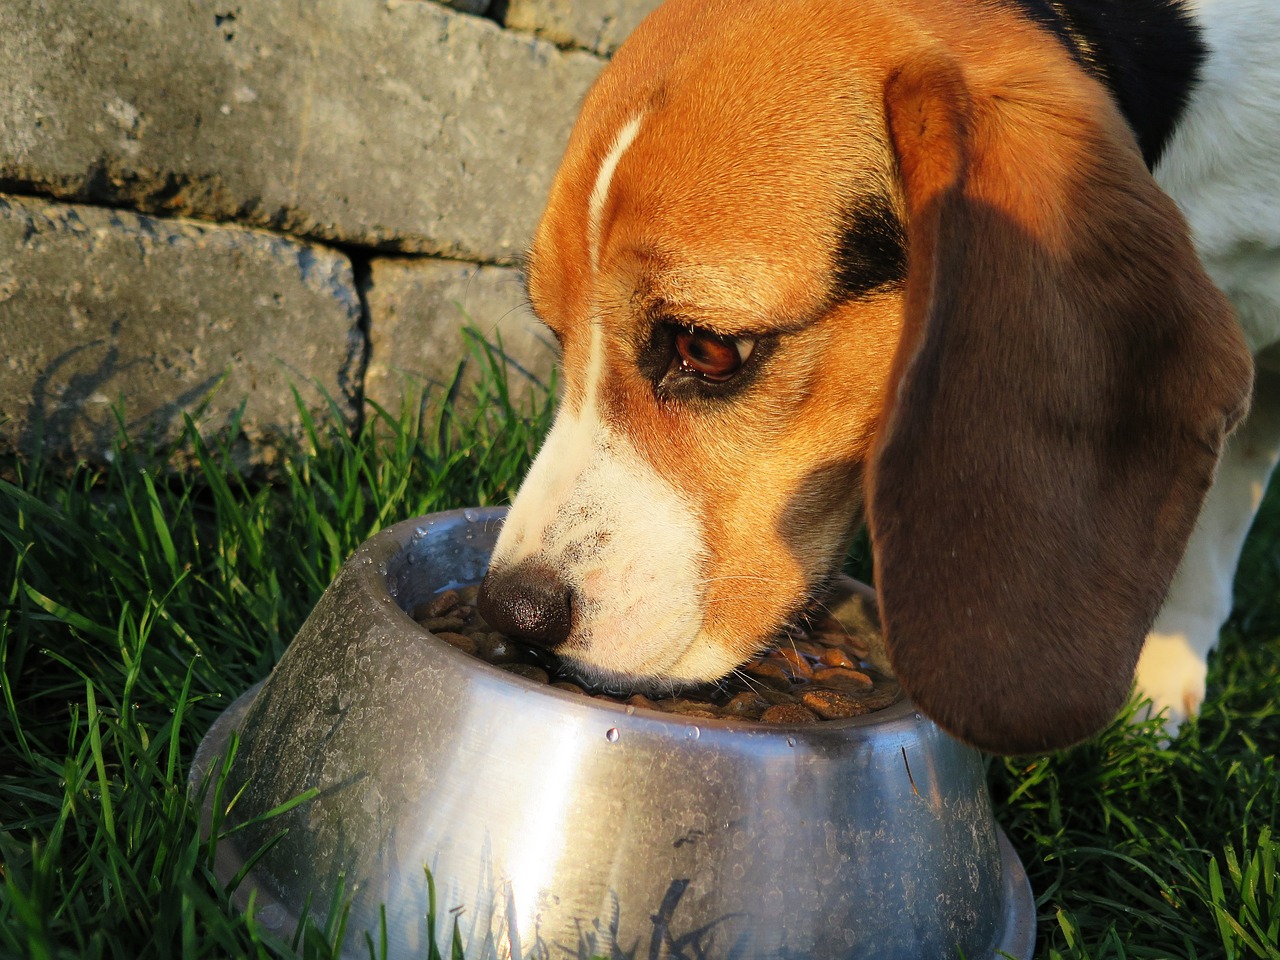 The Benefits of Dry Dog Food: What You Need to Know